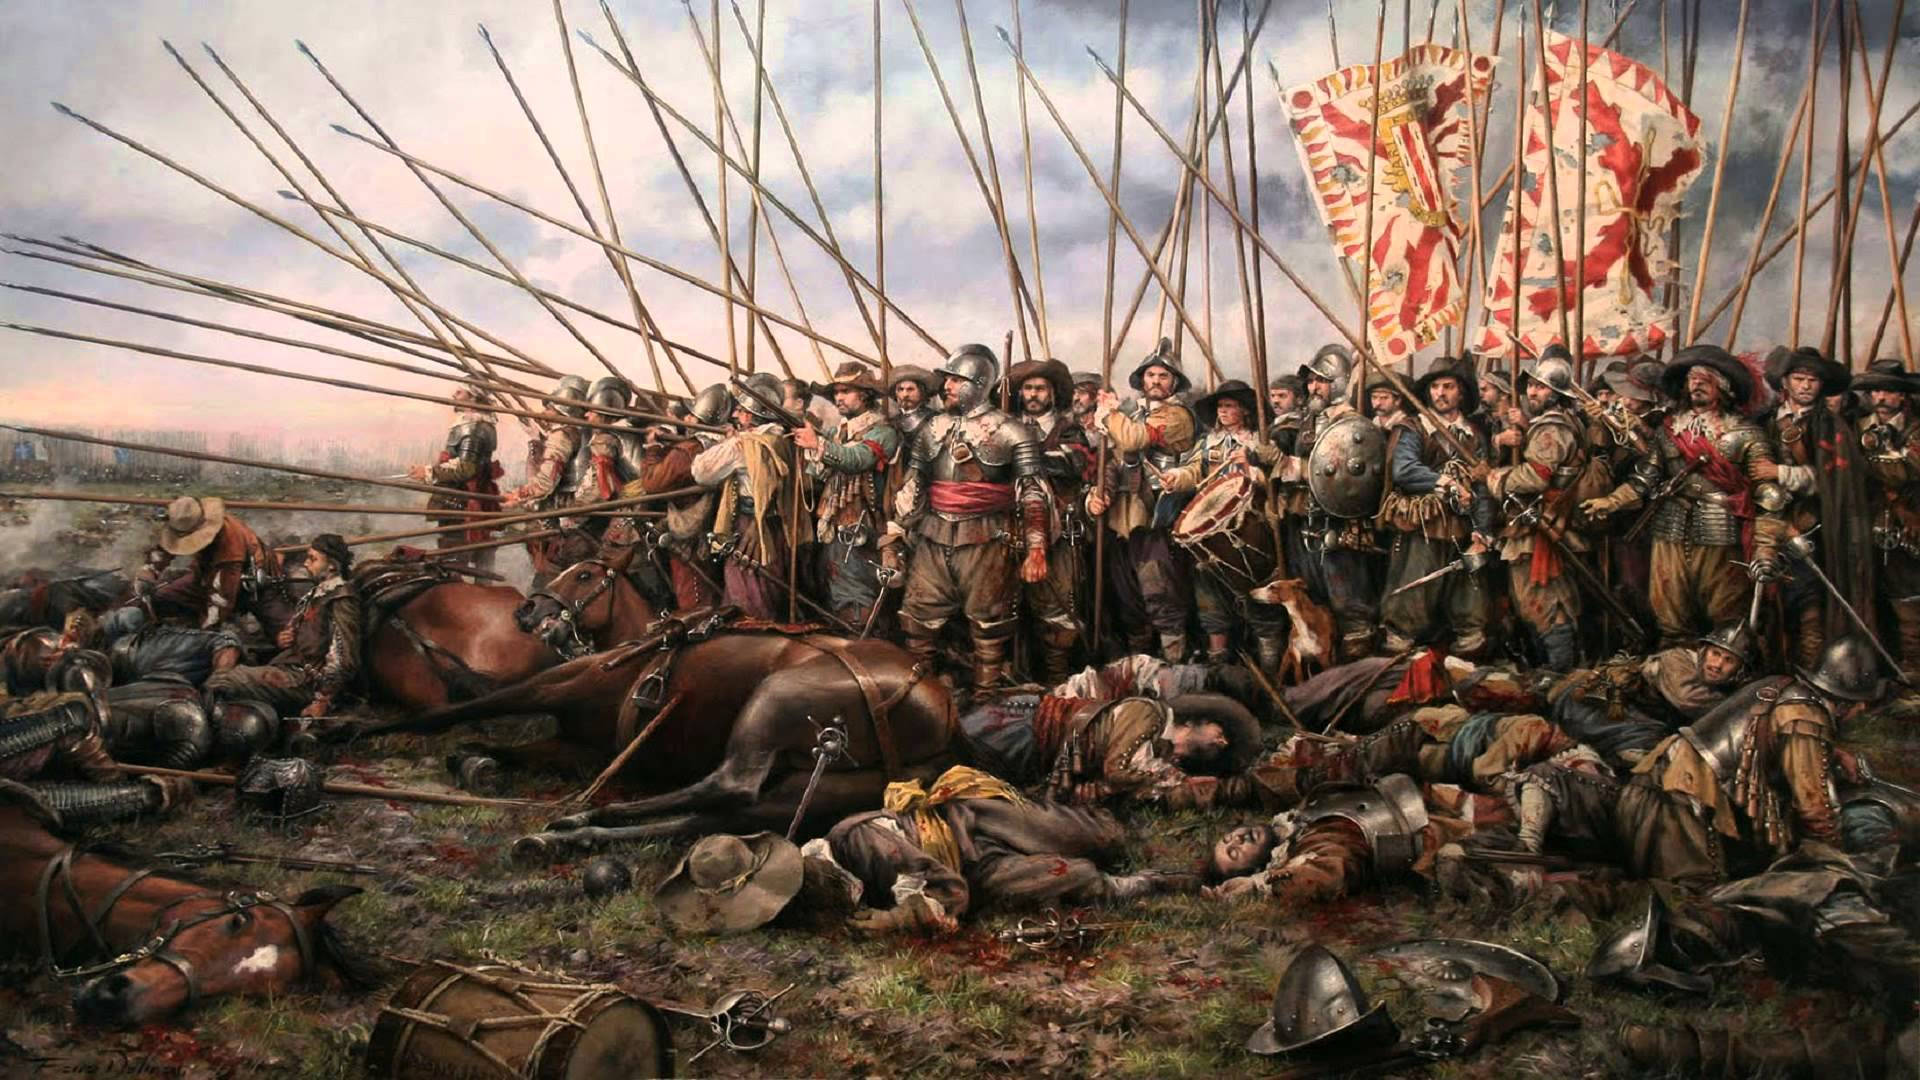 The Battle of Rocroi in the Thirty Years War Wallpaper